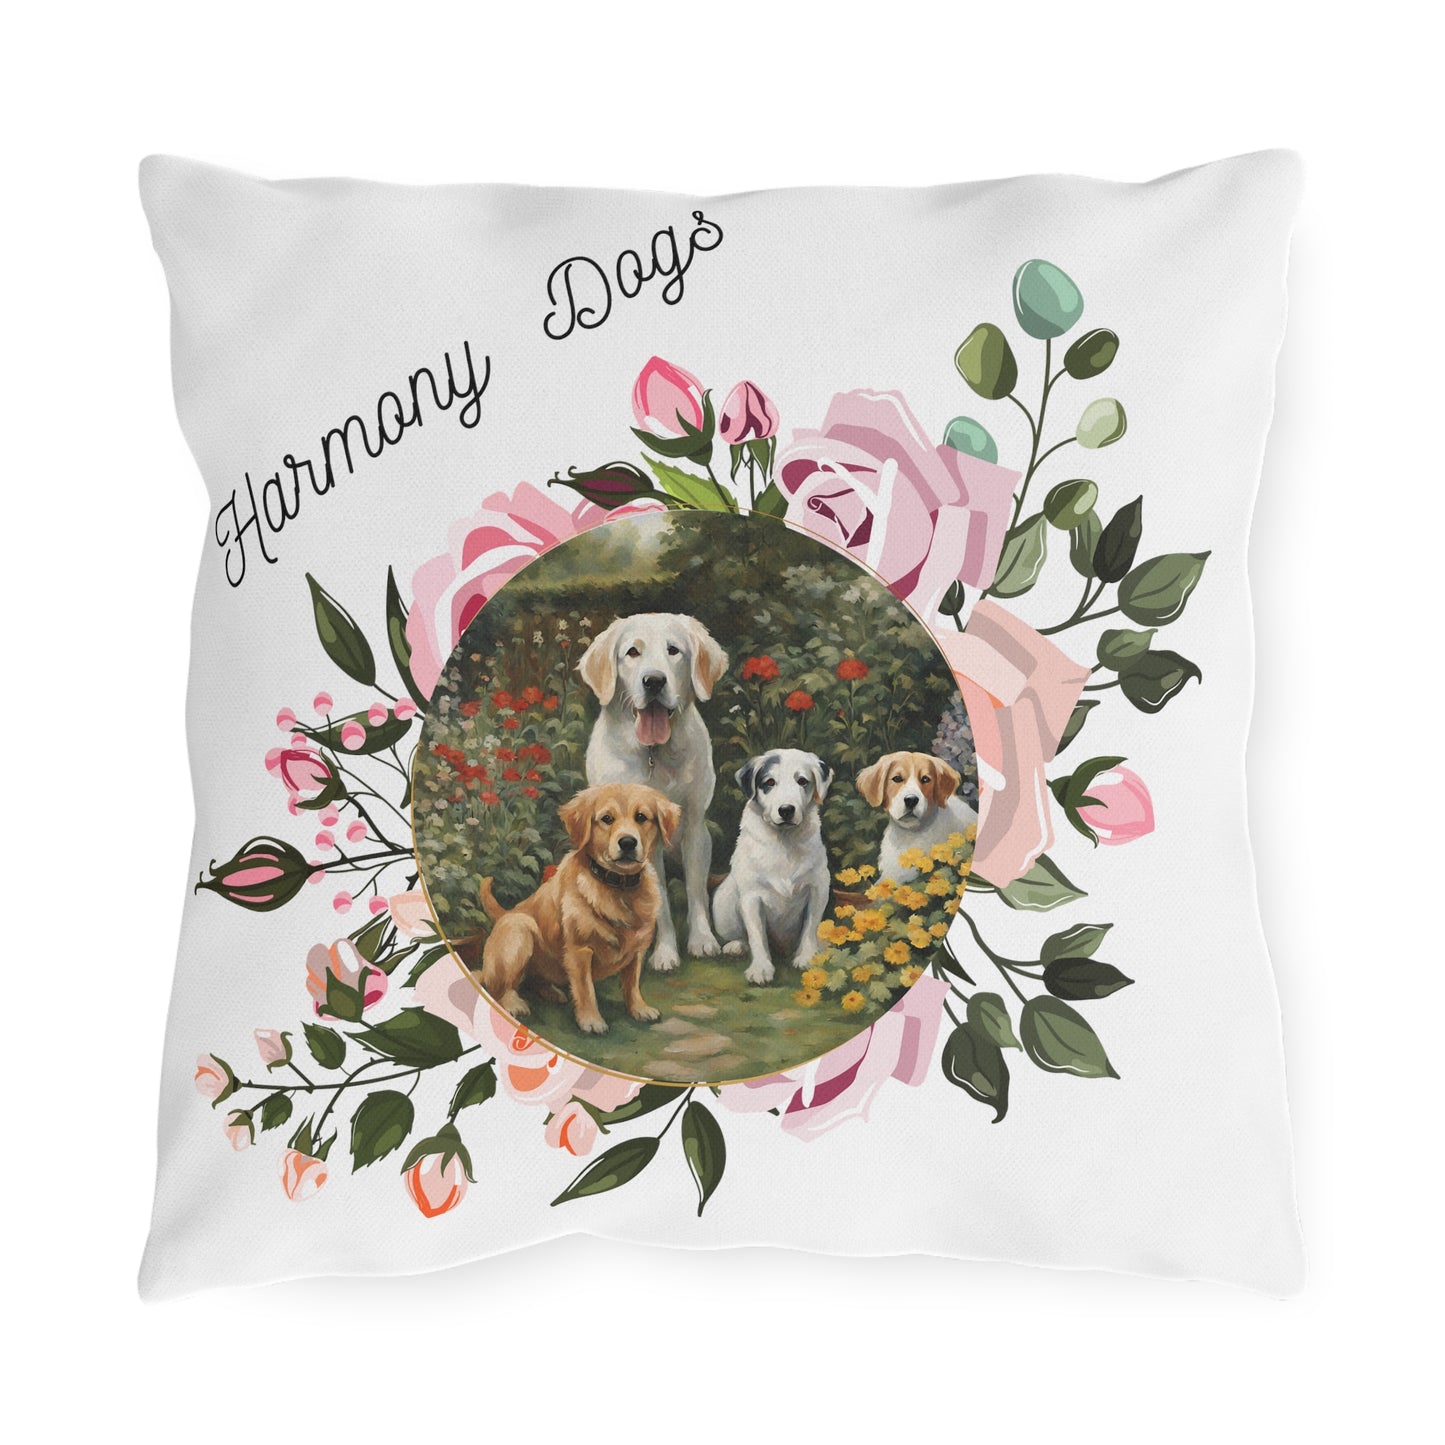 Pet-Lover Patio Pillow, "Harmony Dogs/Just hangin' Out" Design, UV- & Mildew-Resistant